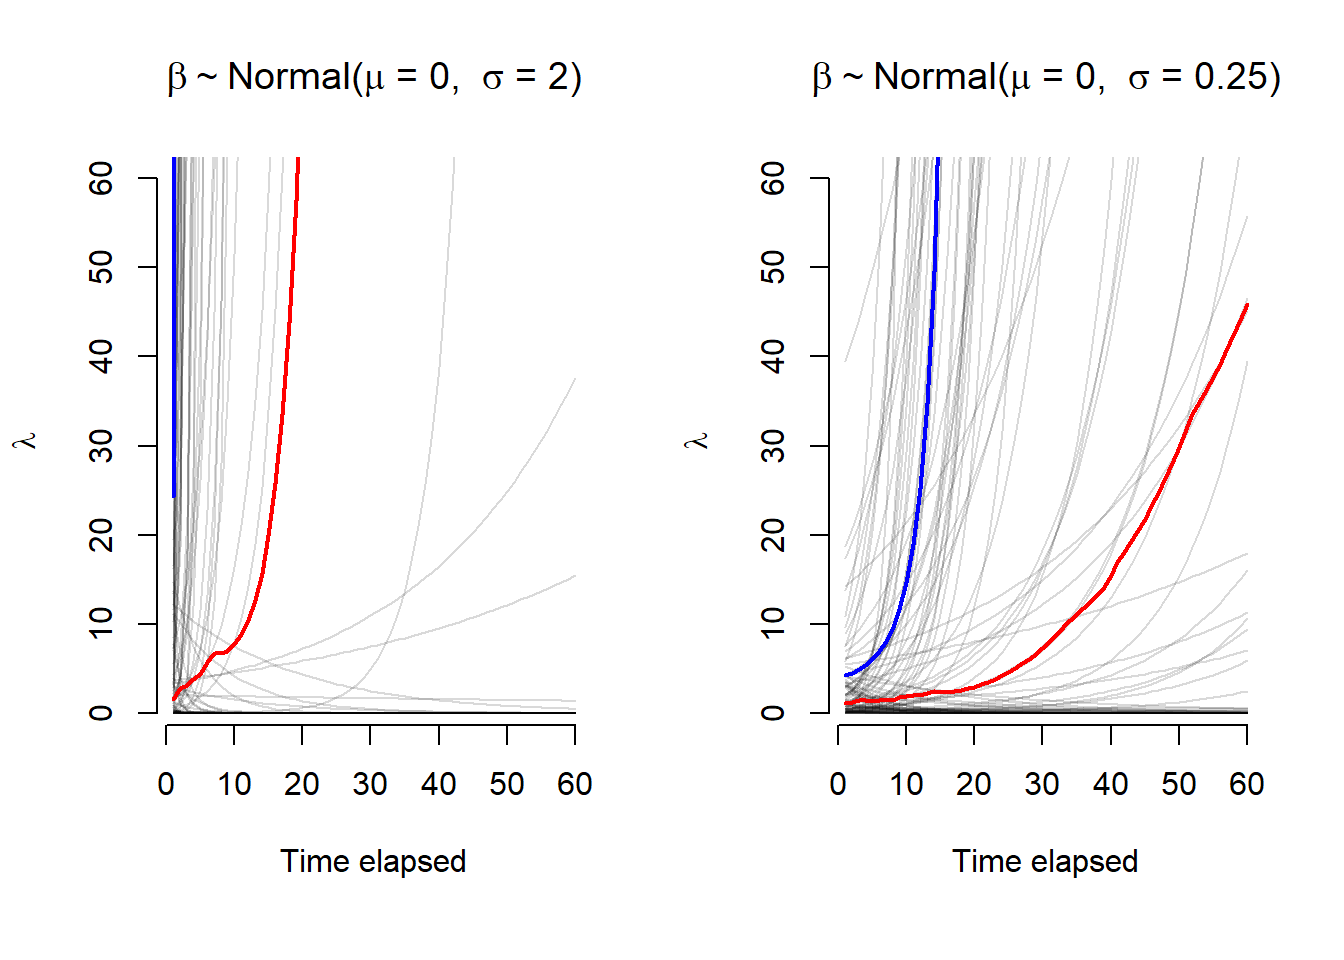 Expected values ($\lambda$) across 60 time points for two sets of $\alpha$ and $\beta$ prior distributions with a log-link function. The mean and median values are plotted in blue and red, respectively. With a higher variance, the first panel has most of the prior expecation for $\lambda$ rising very quickly, this is less dramatic in the second panel.